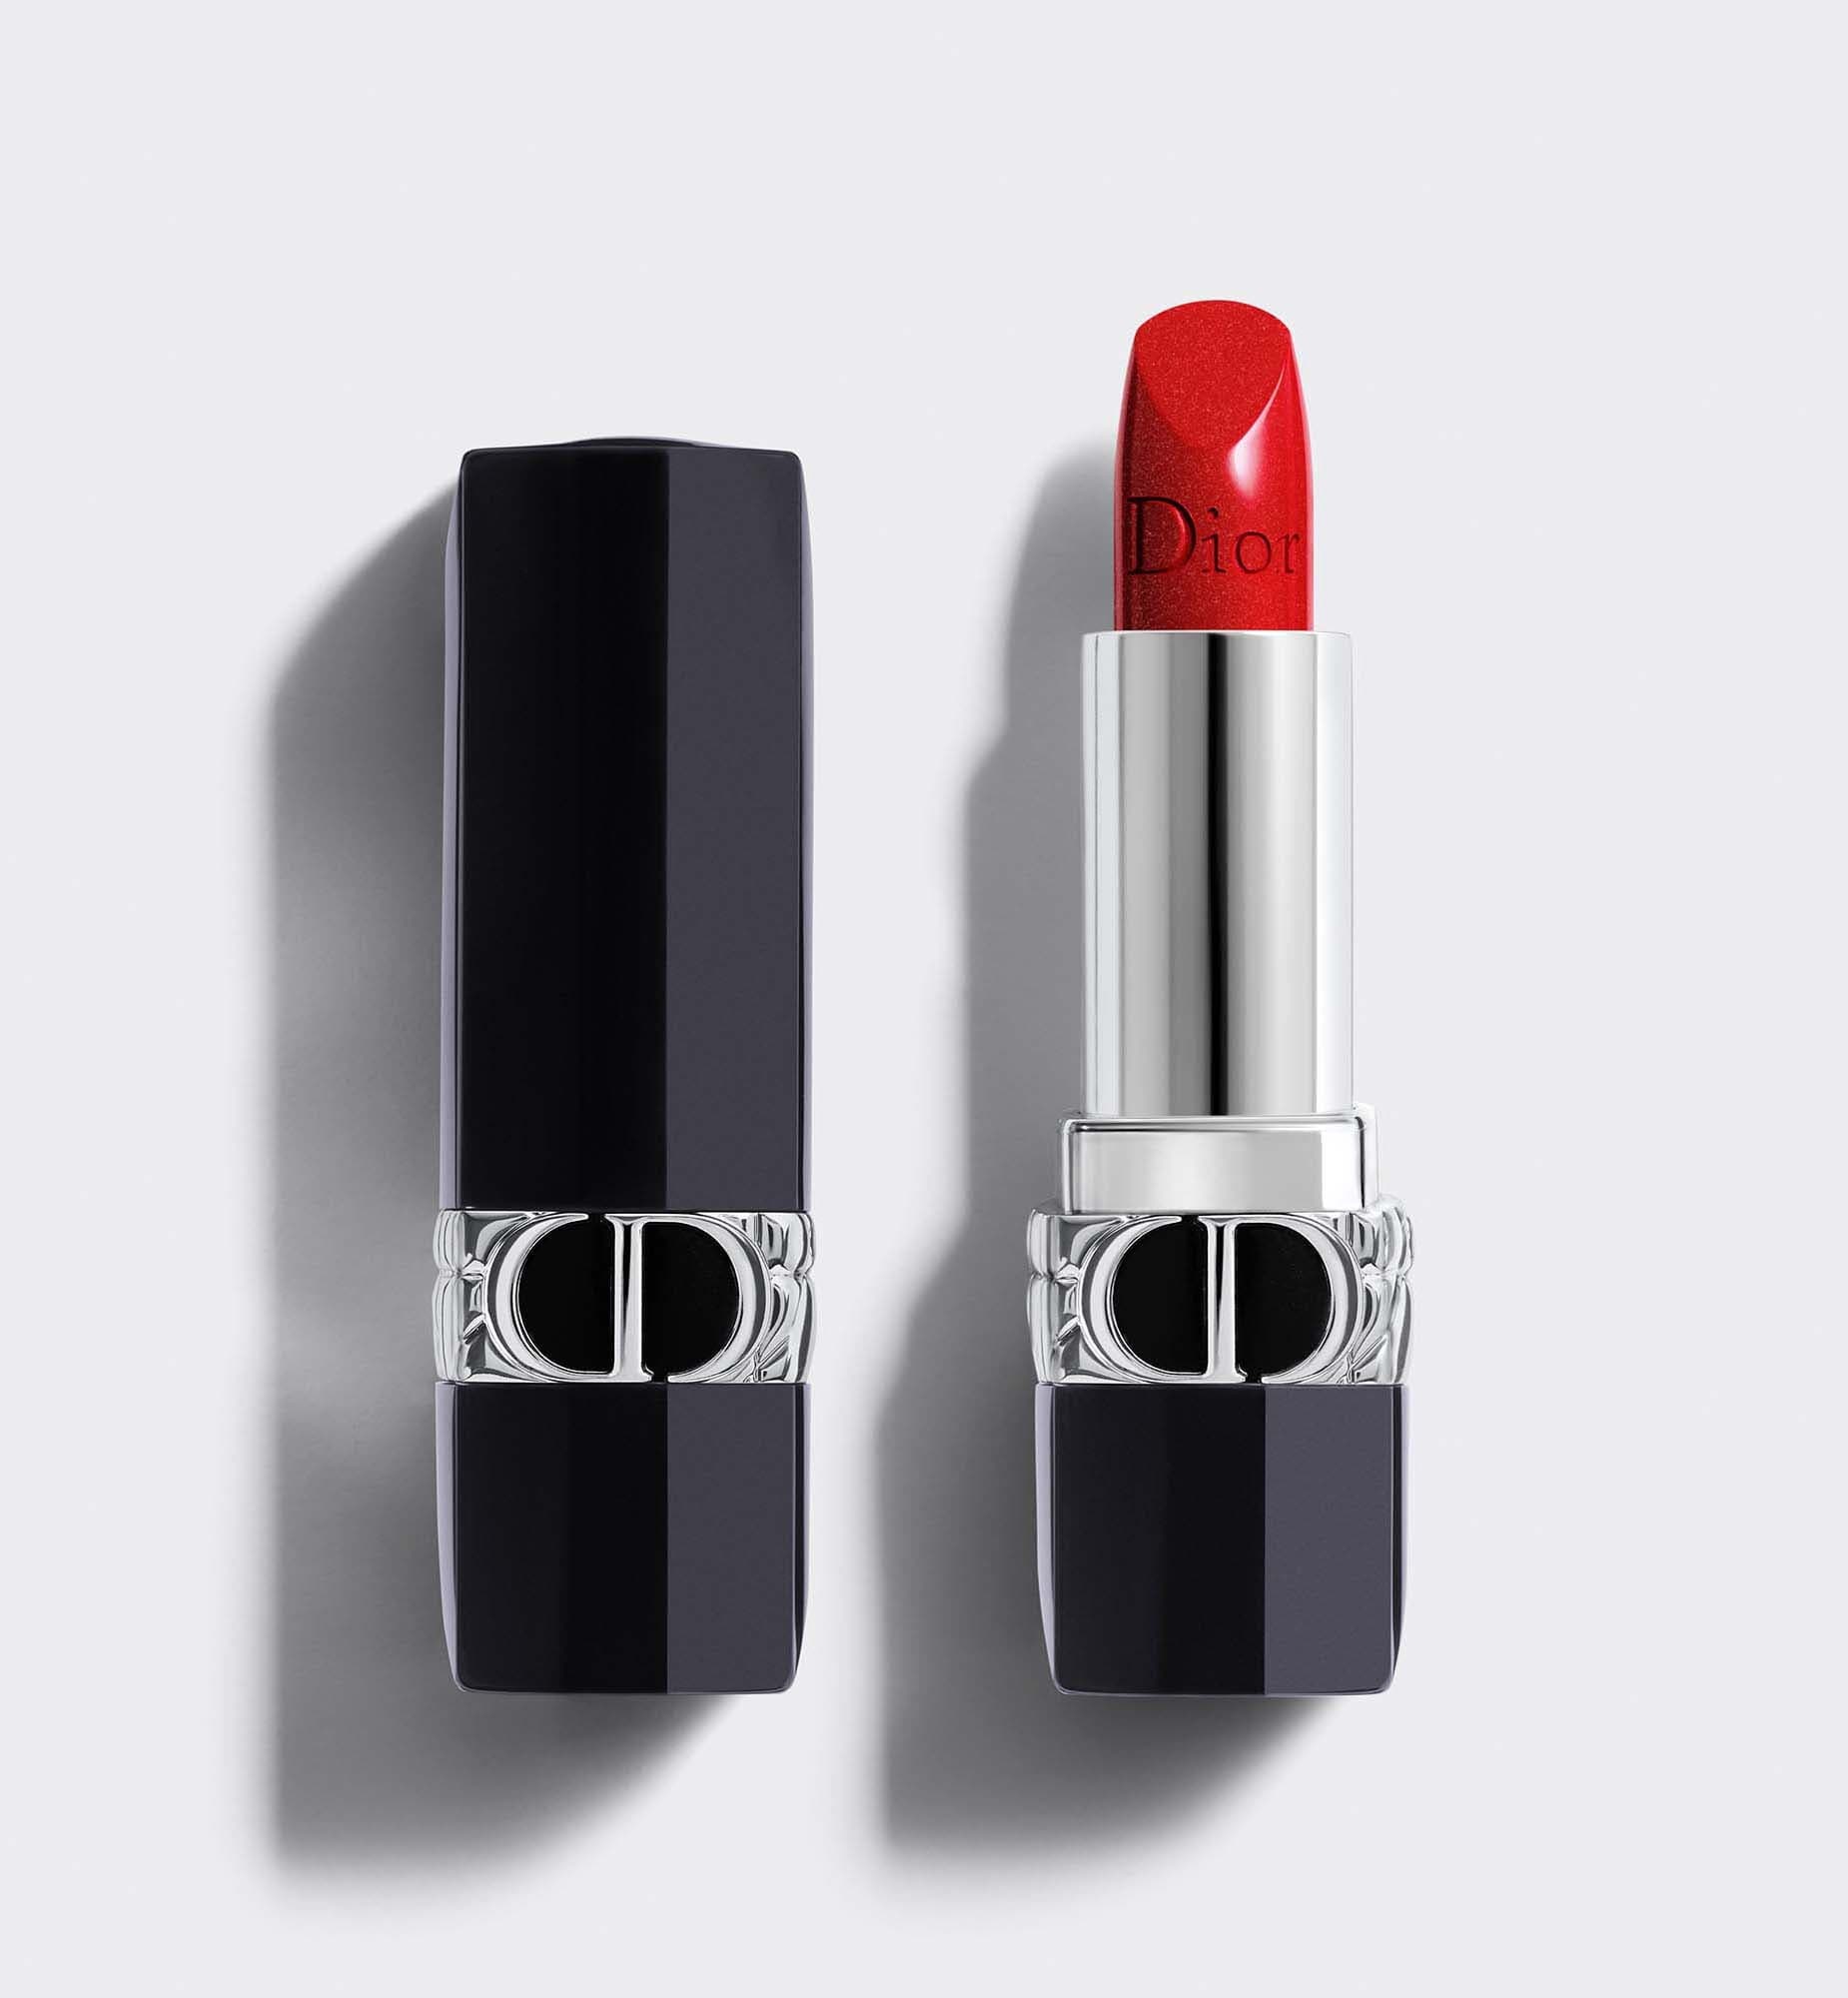 ROUGE DIOR | Refillable Lipstick with 4 Couture Finishes: Satin, Matte, Metallic & New Velvet